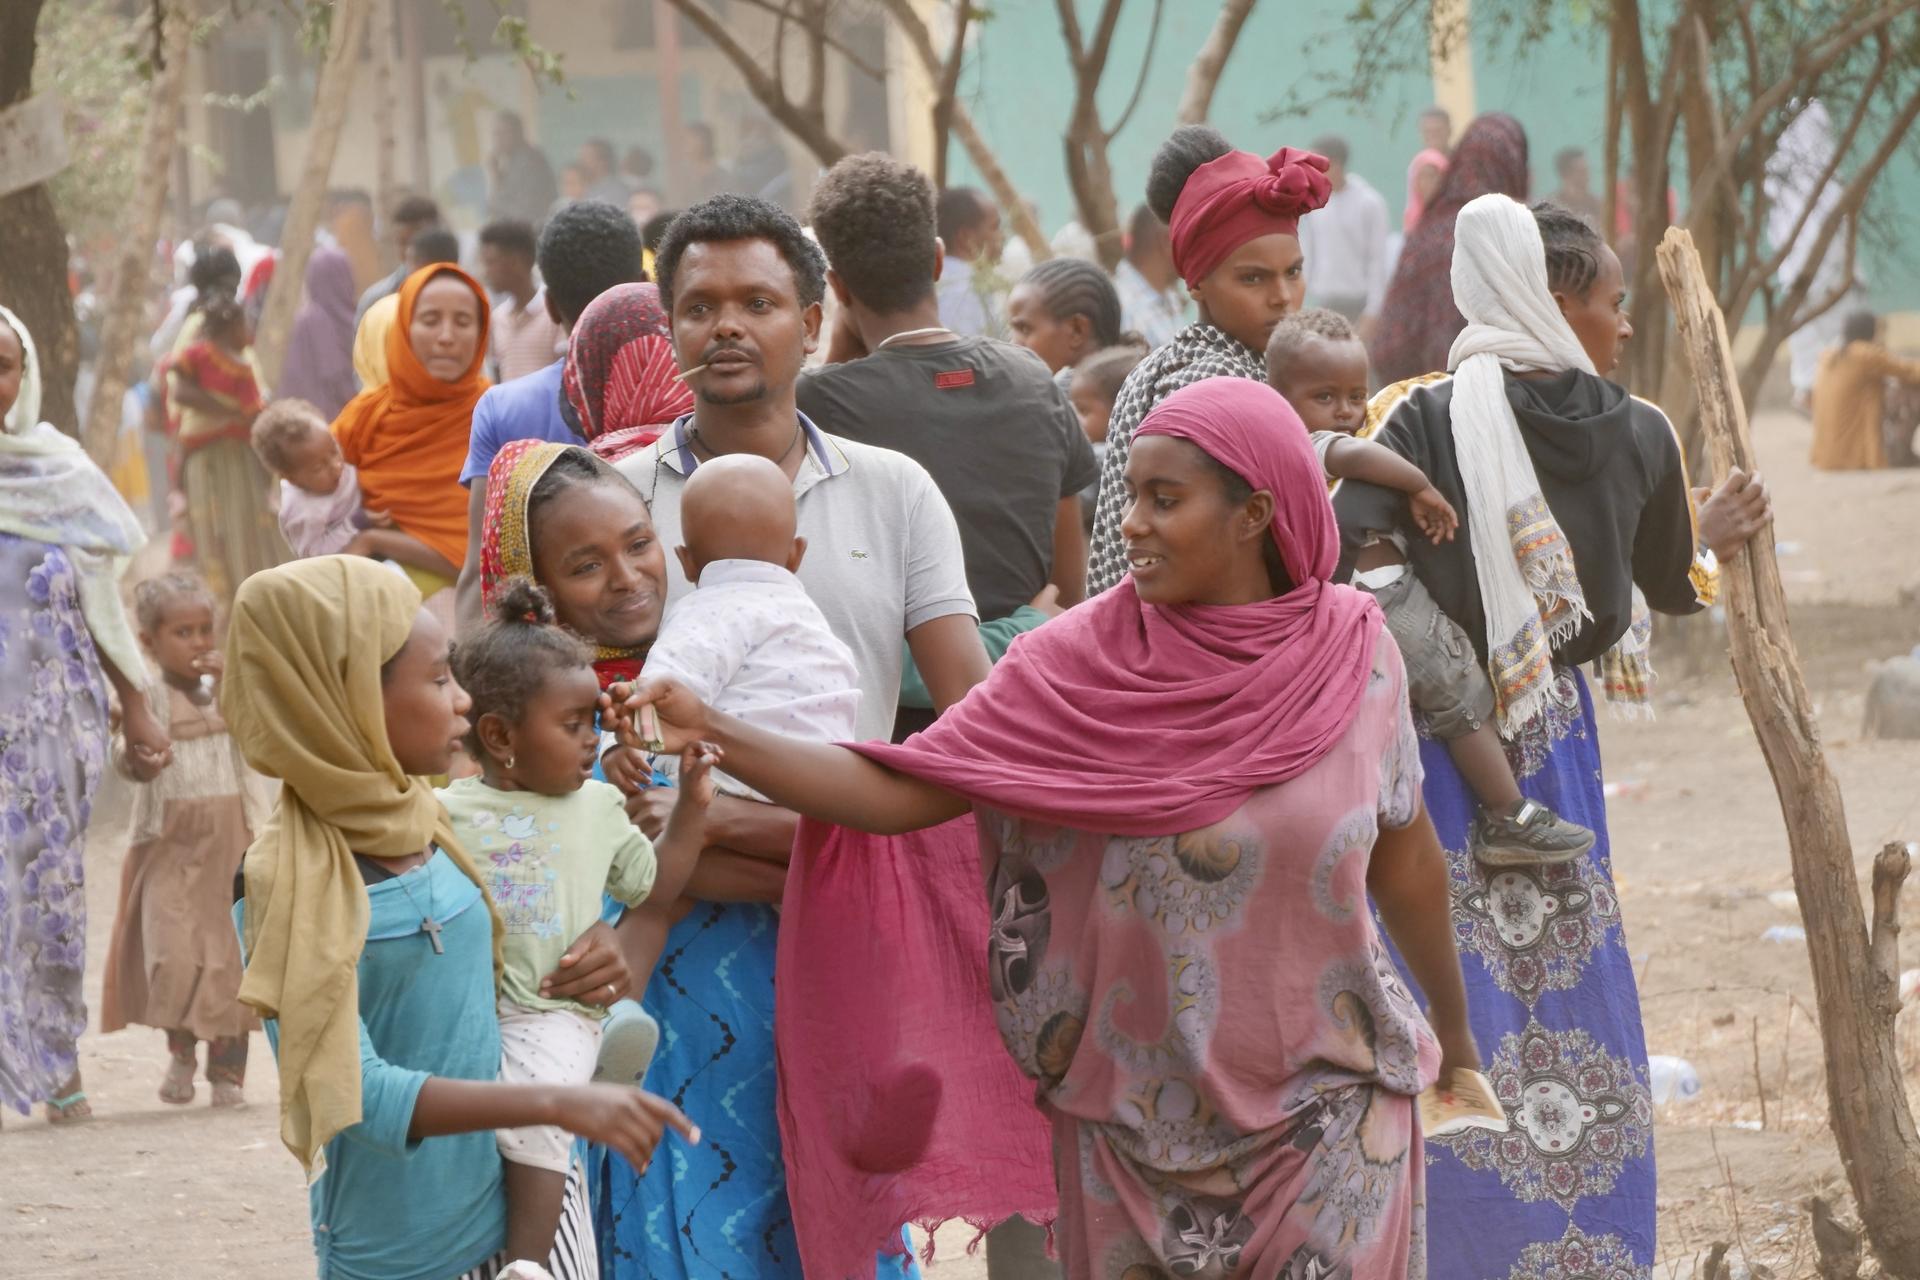 Internally displaced people at a school in Ethiopia's Kobo town, near the border with Tigray, Feb, 20, 2022.